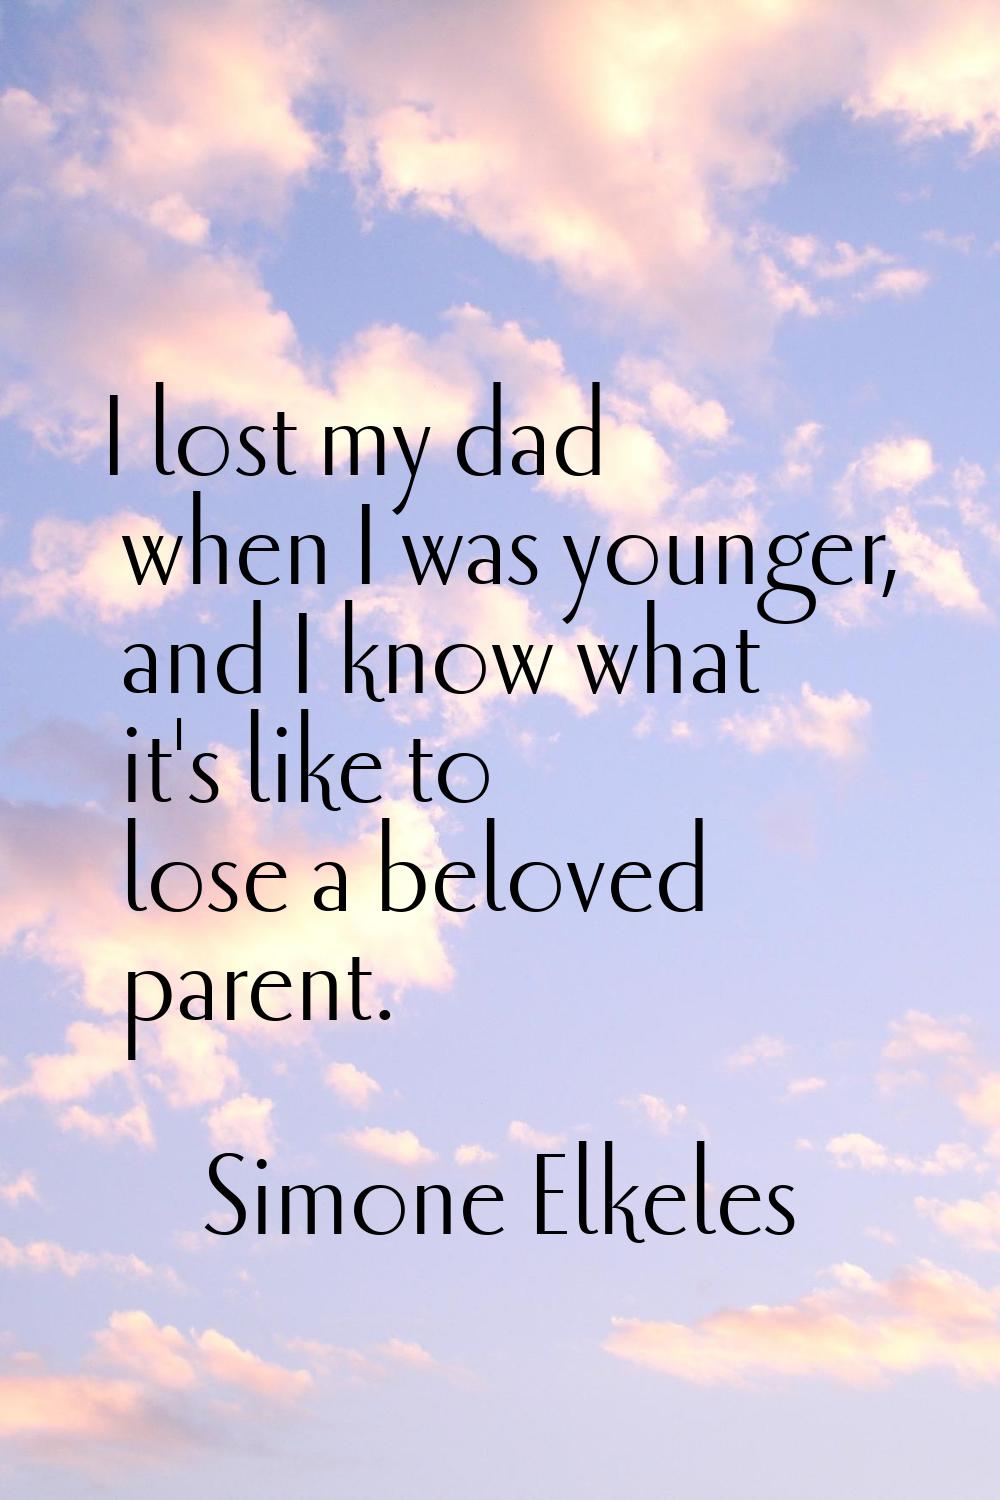 I lost my dad when I was younger, and I know what it's like to lose a beloved parent.